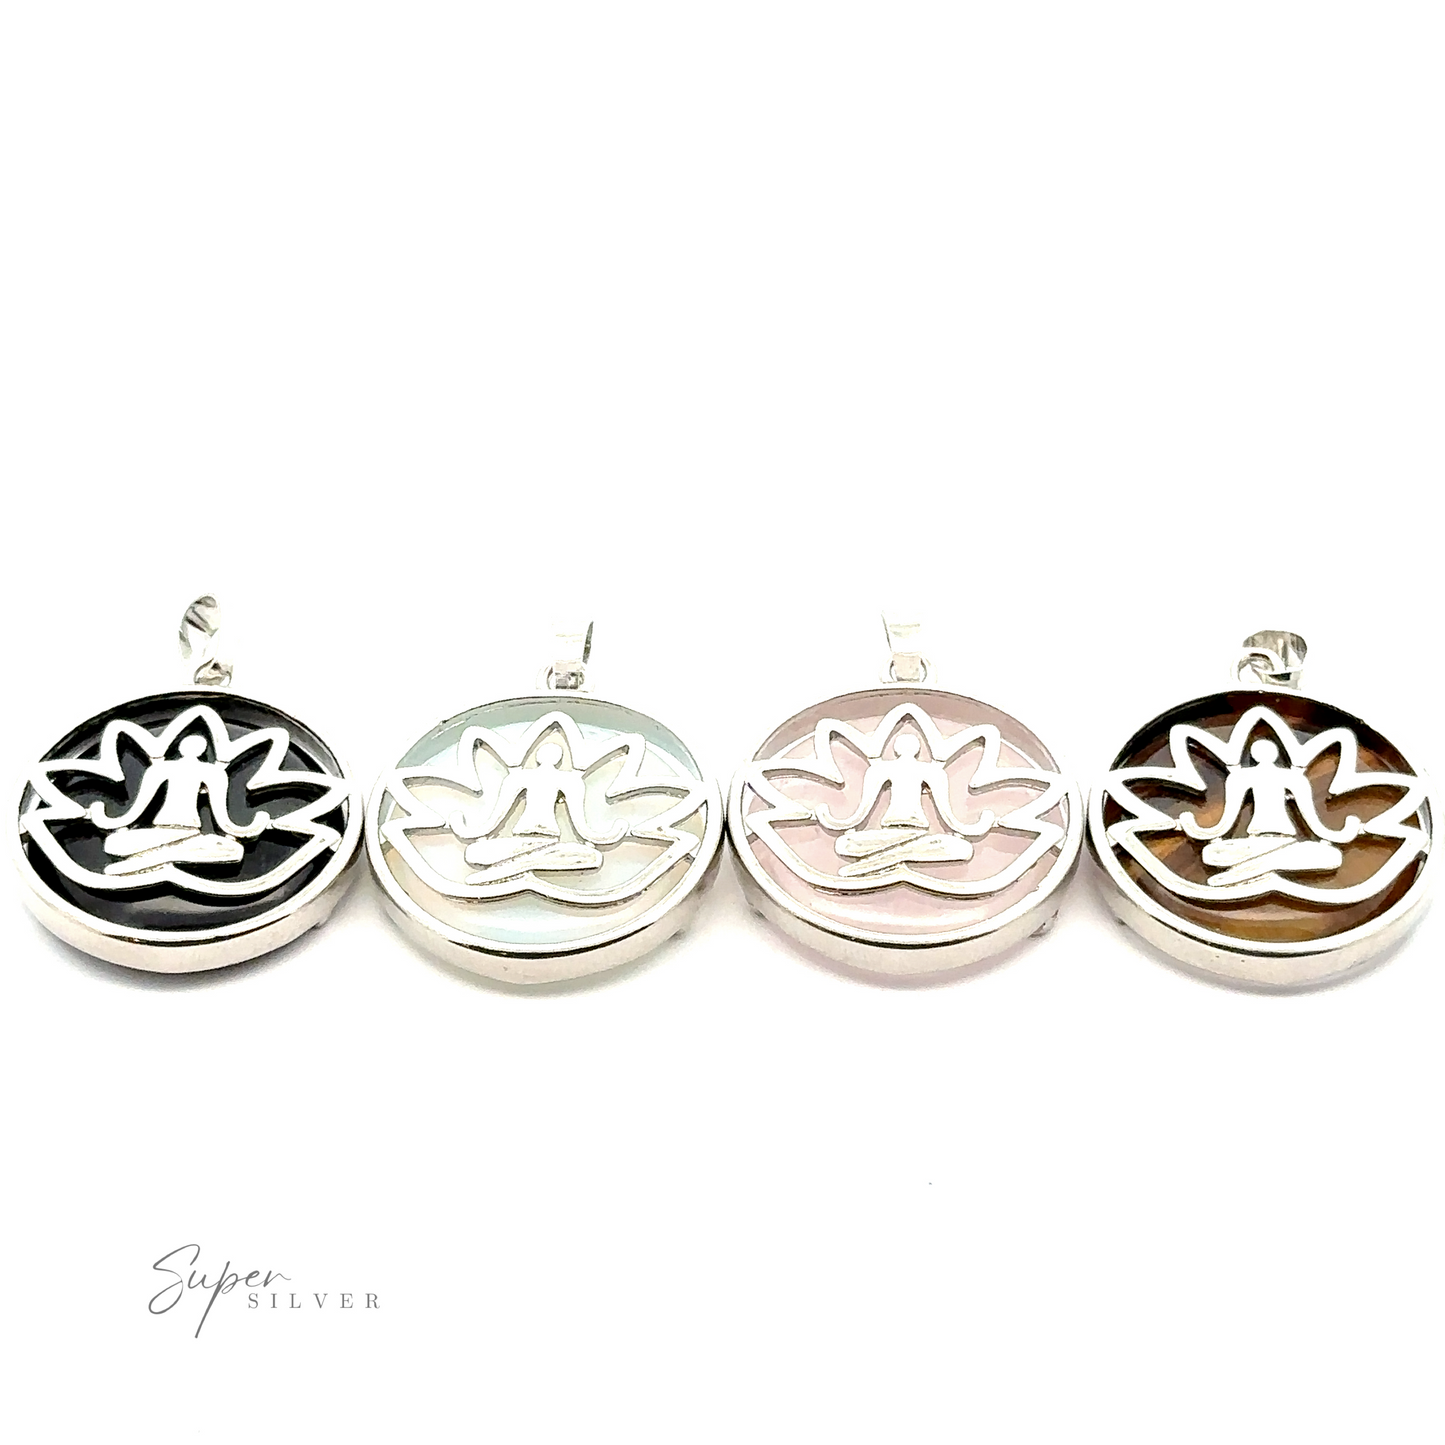 Four round pendants with intricate lotus designs, silver-plated and showcased in black, white, pink, and brown colors. The "Silver Plated Lotus Meditation Pendant with Gemstone" text is visible in the bottom left corner.